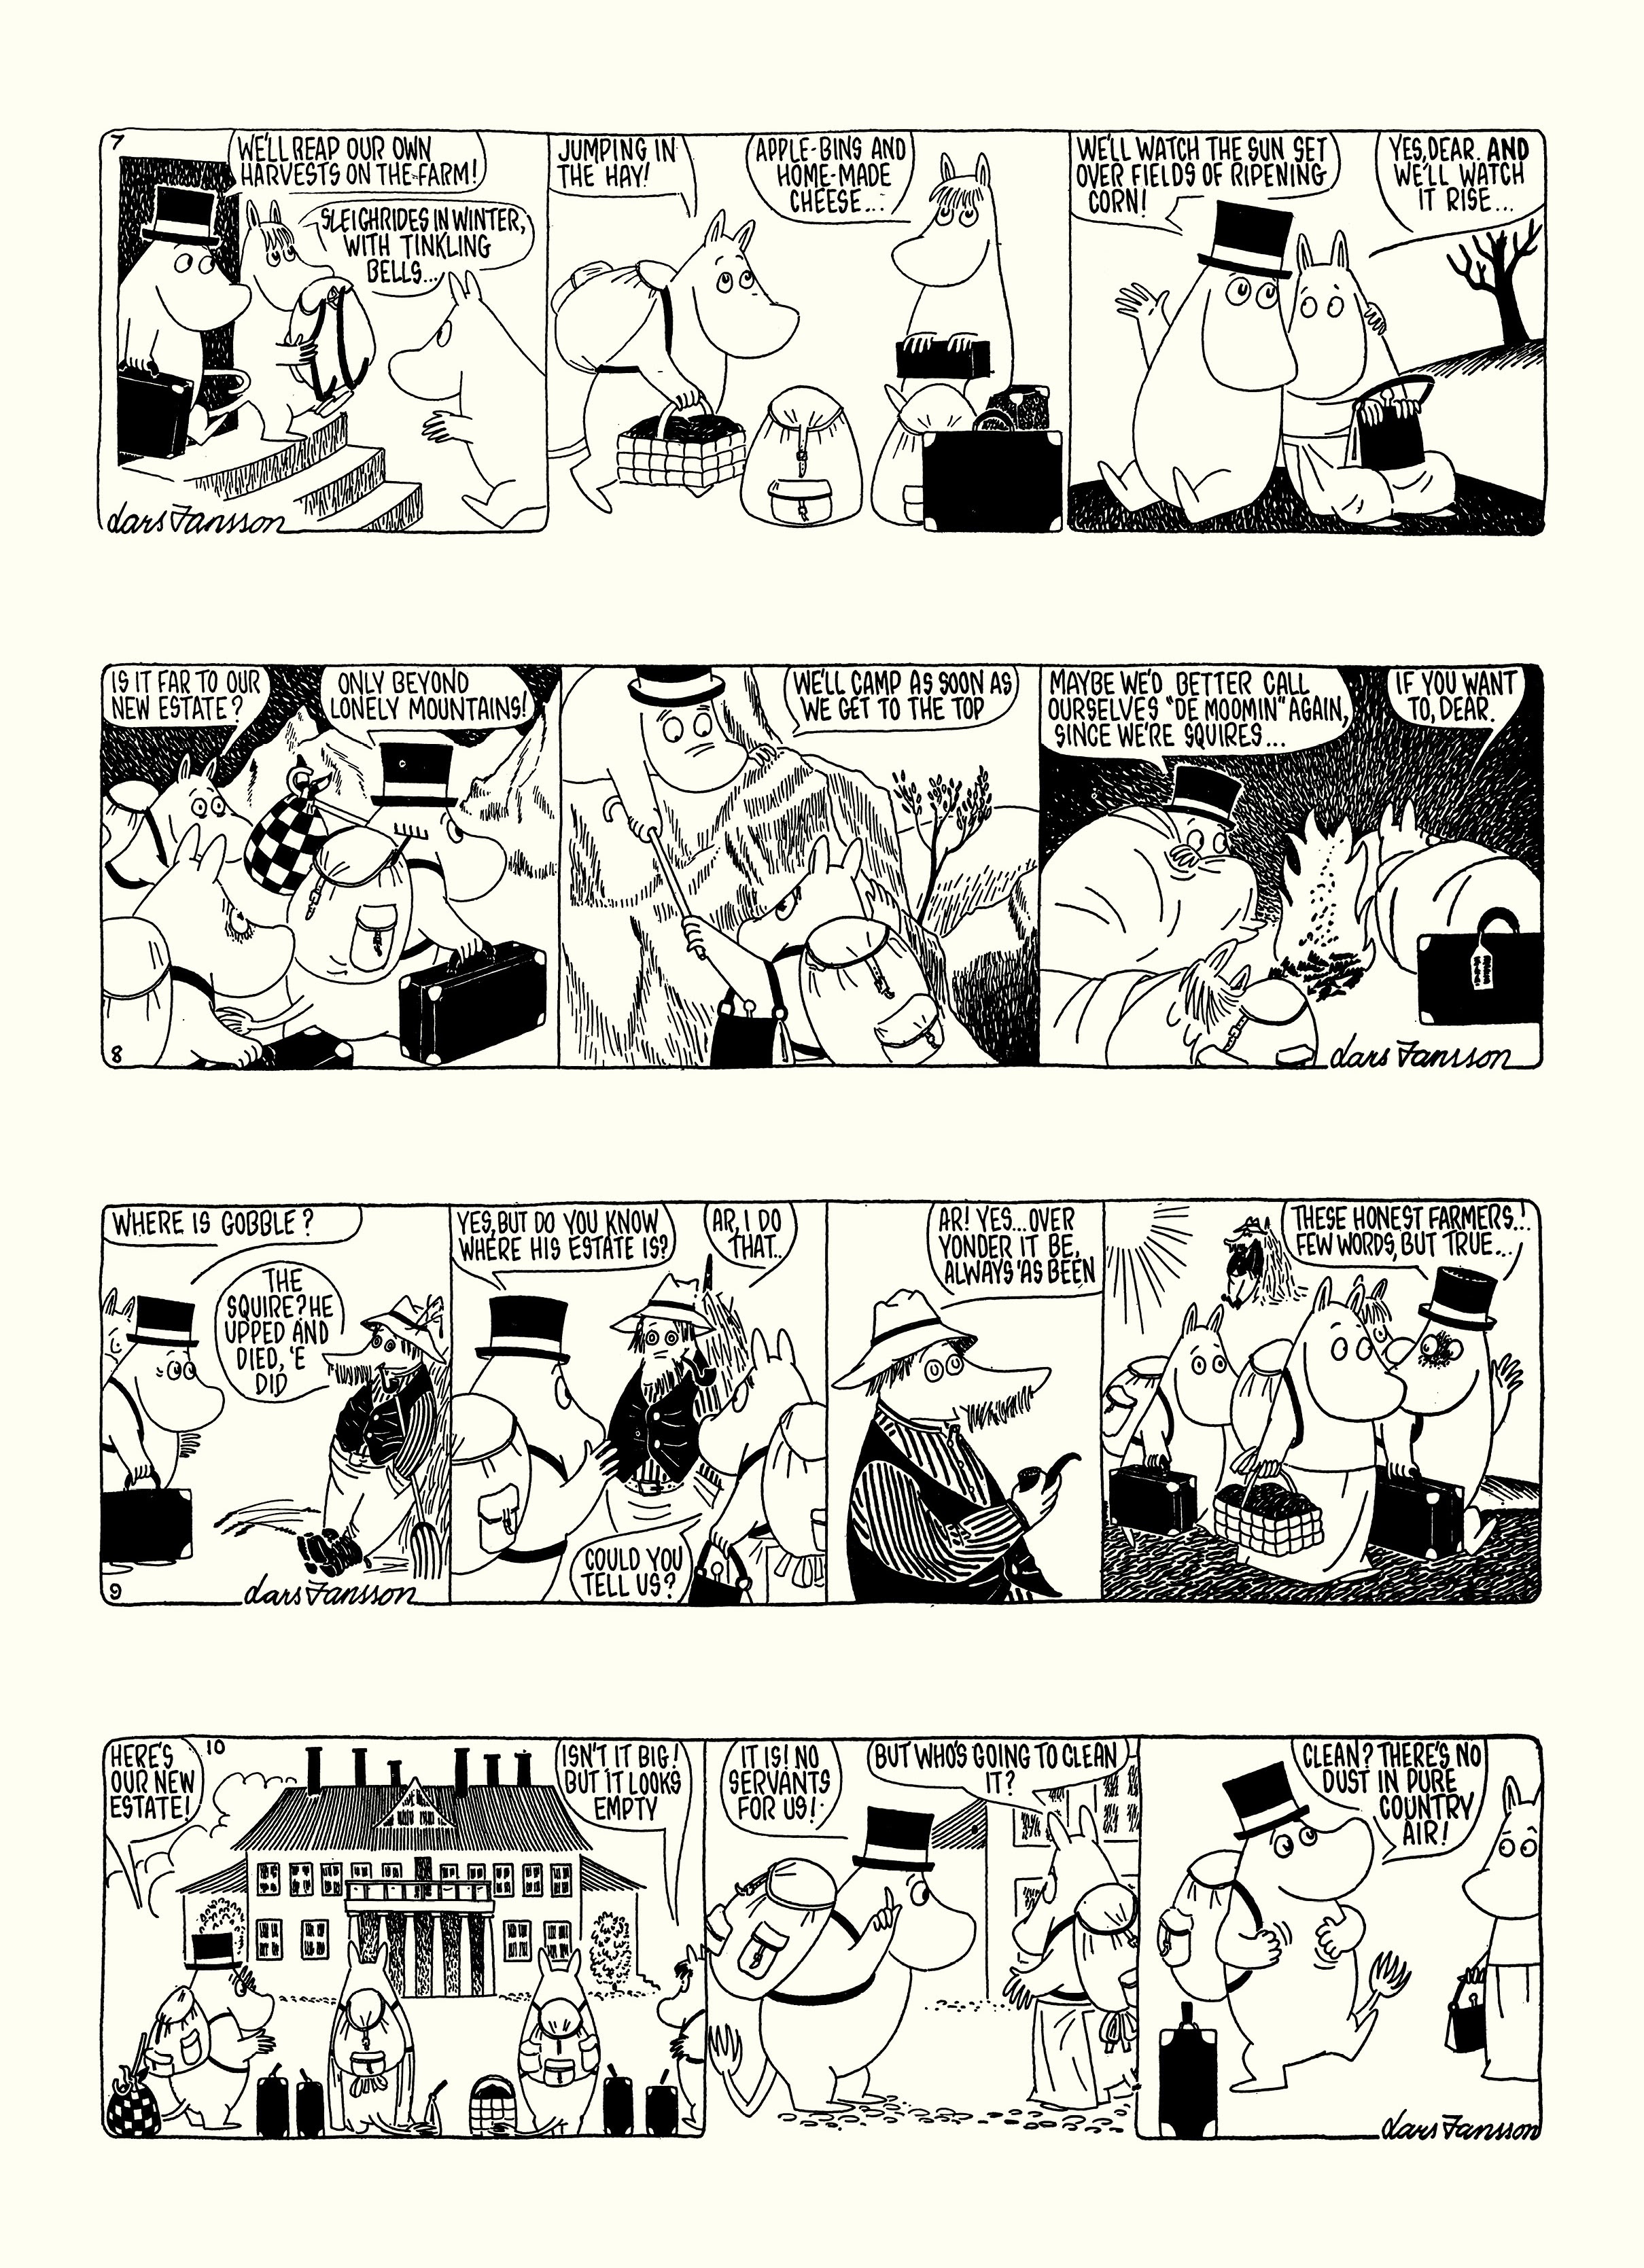 Read online Moomin: The Complete Lars Jansson Comic Strip comic -  Issue # TPB 7 - 50